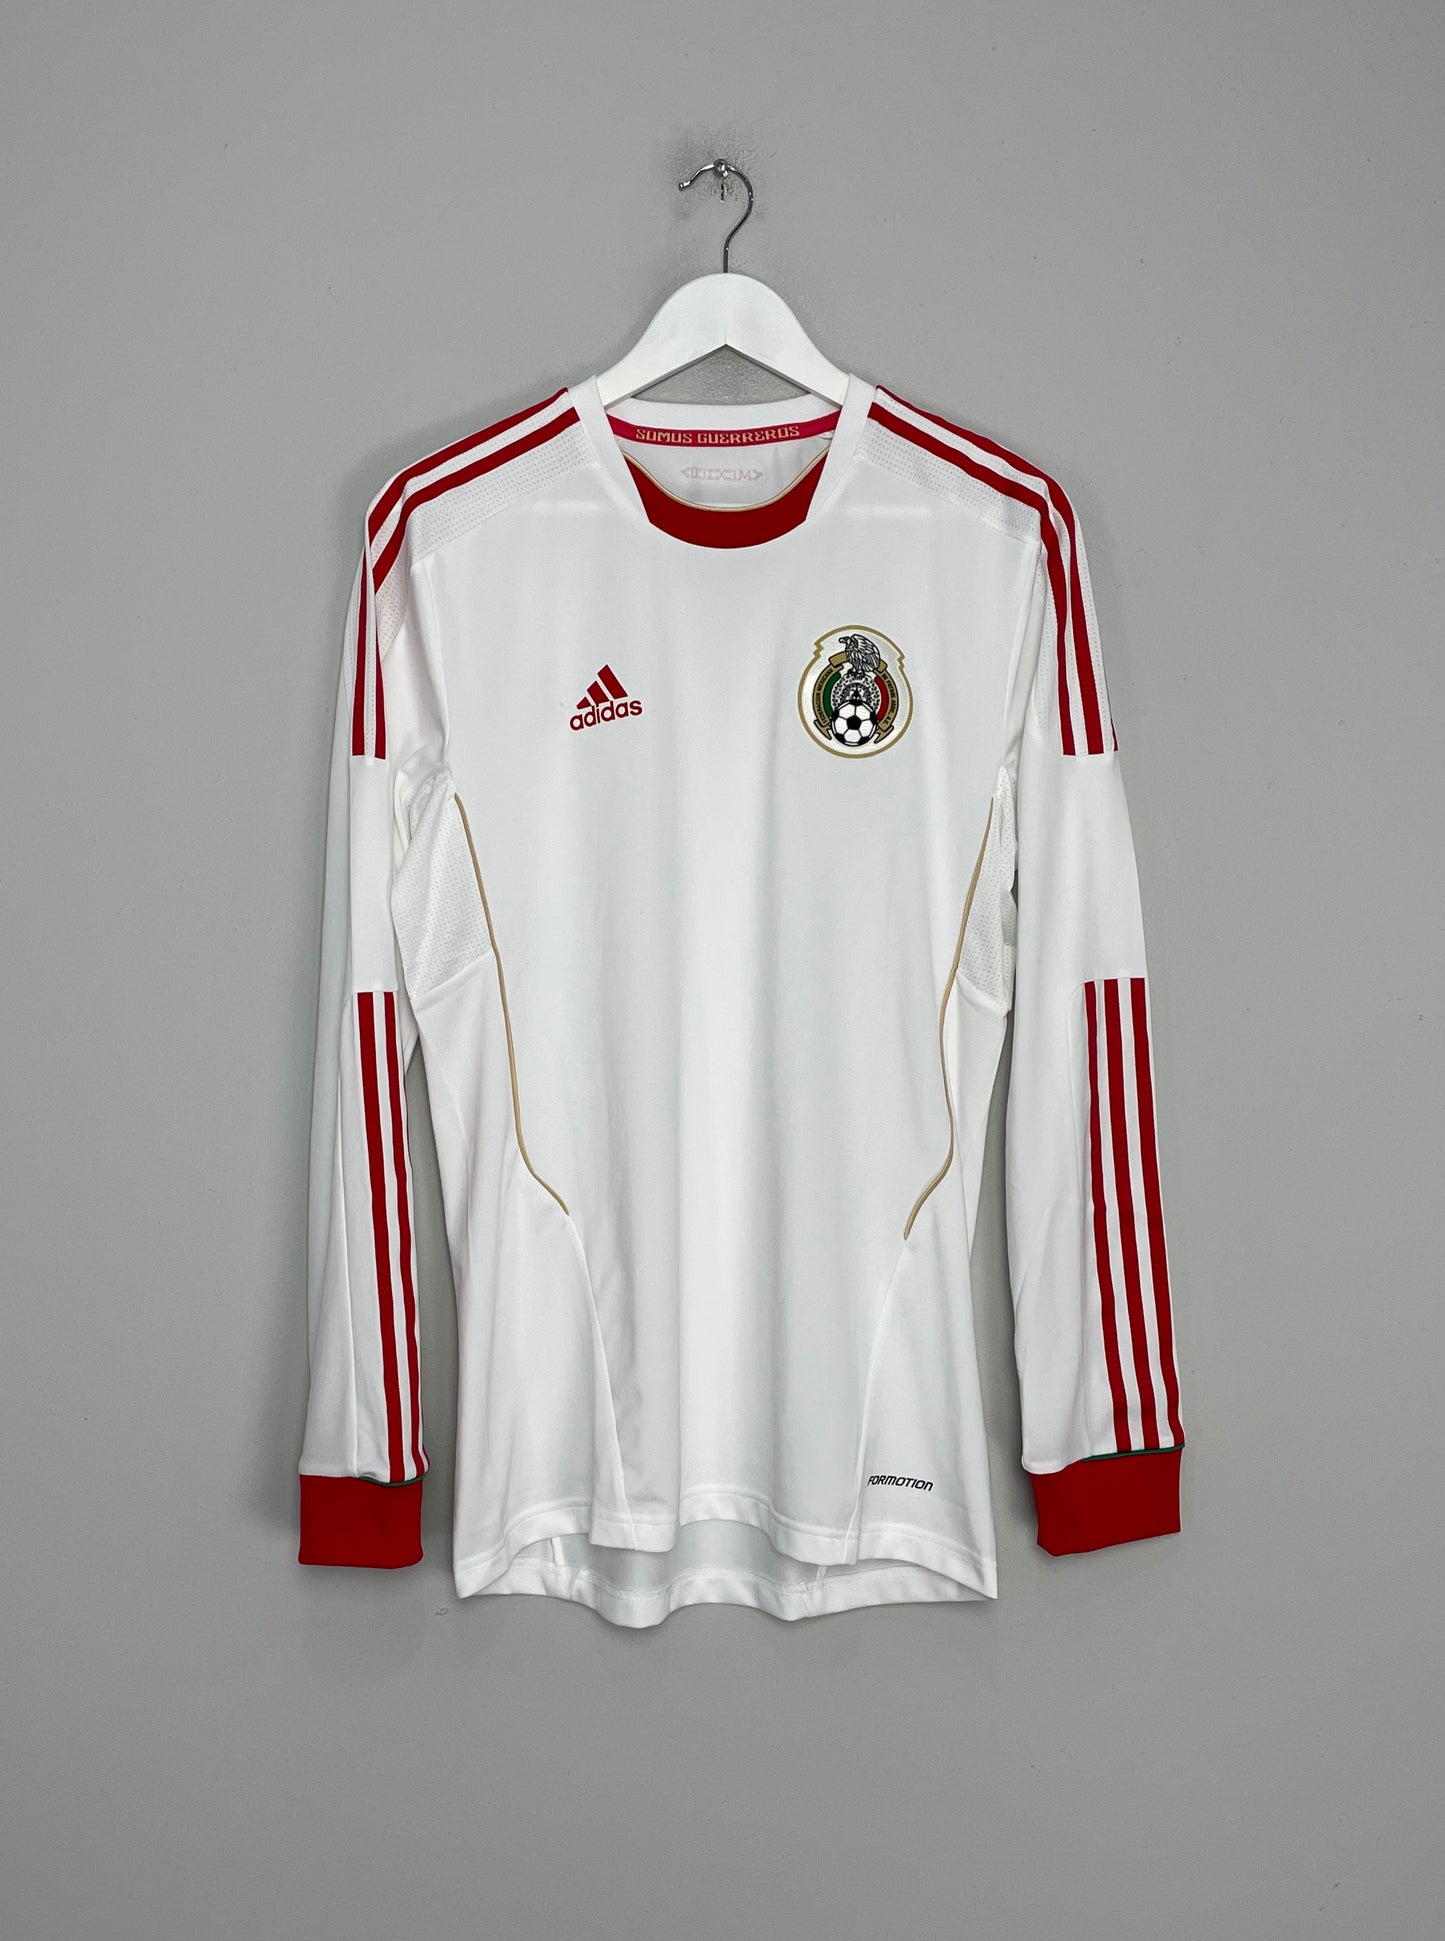 2011/12 MEXICO L/S *PLAYER ISSUE* AWAY SHIRT (L) ADIDAS